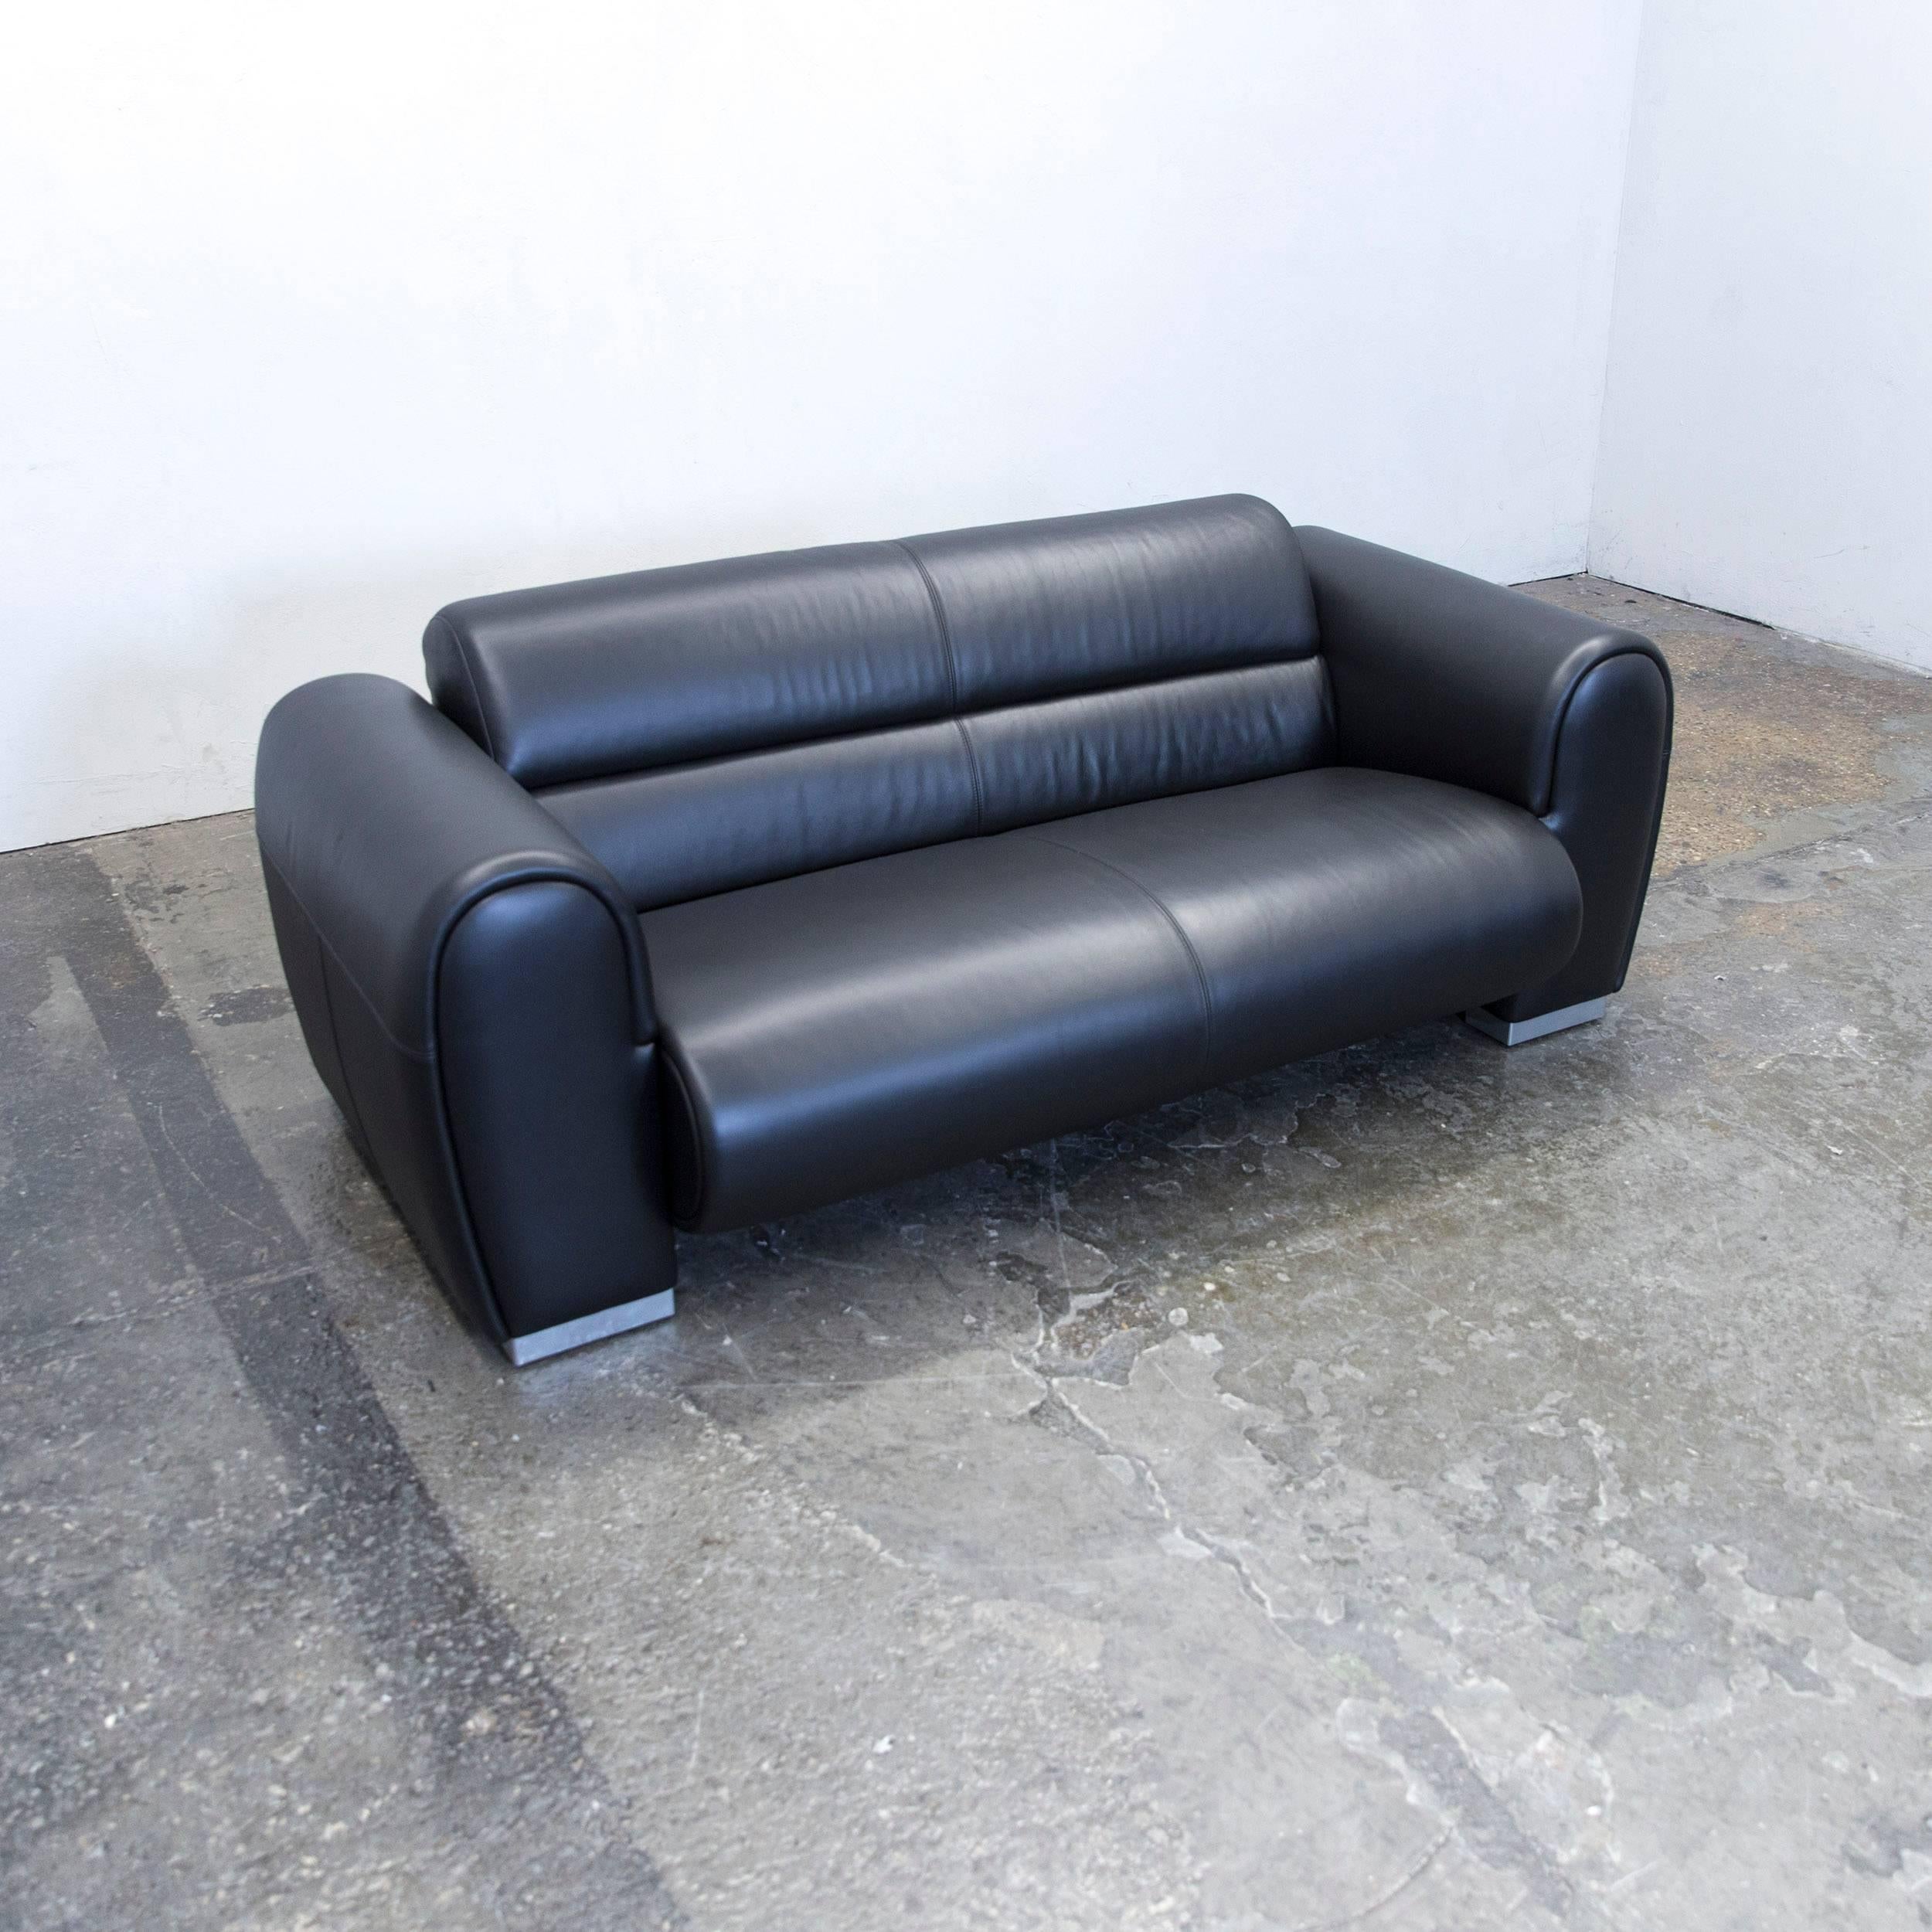 German Brühl & Sippold Sumo Designer Sofa Leather Black Two-Seat Couch Modern For Sale